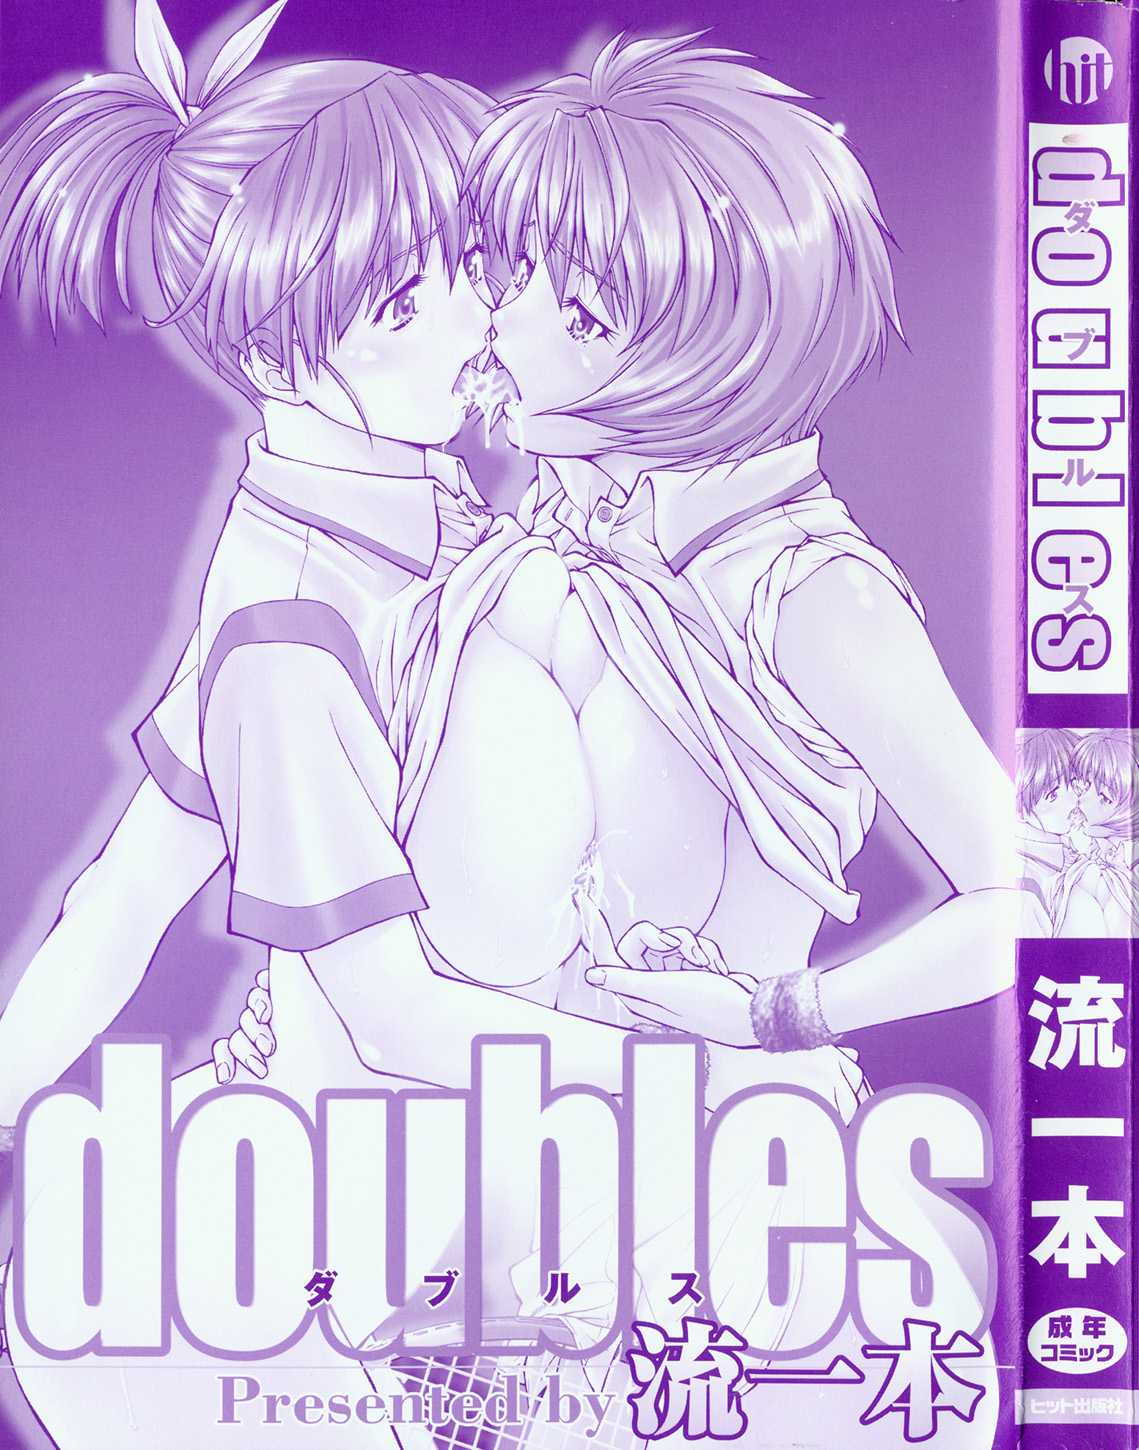 [Nagare Ippon] doubles [流一本] doubles